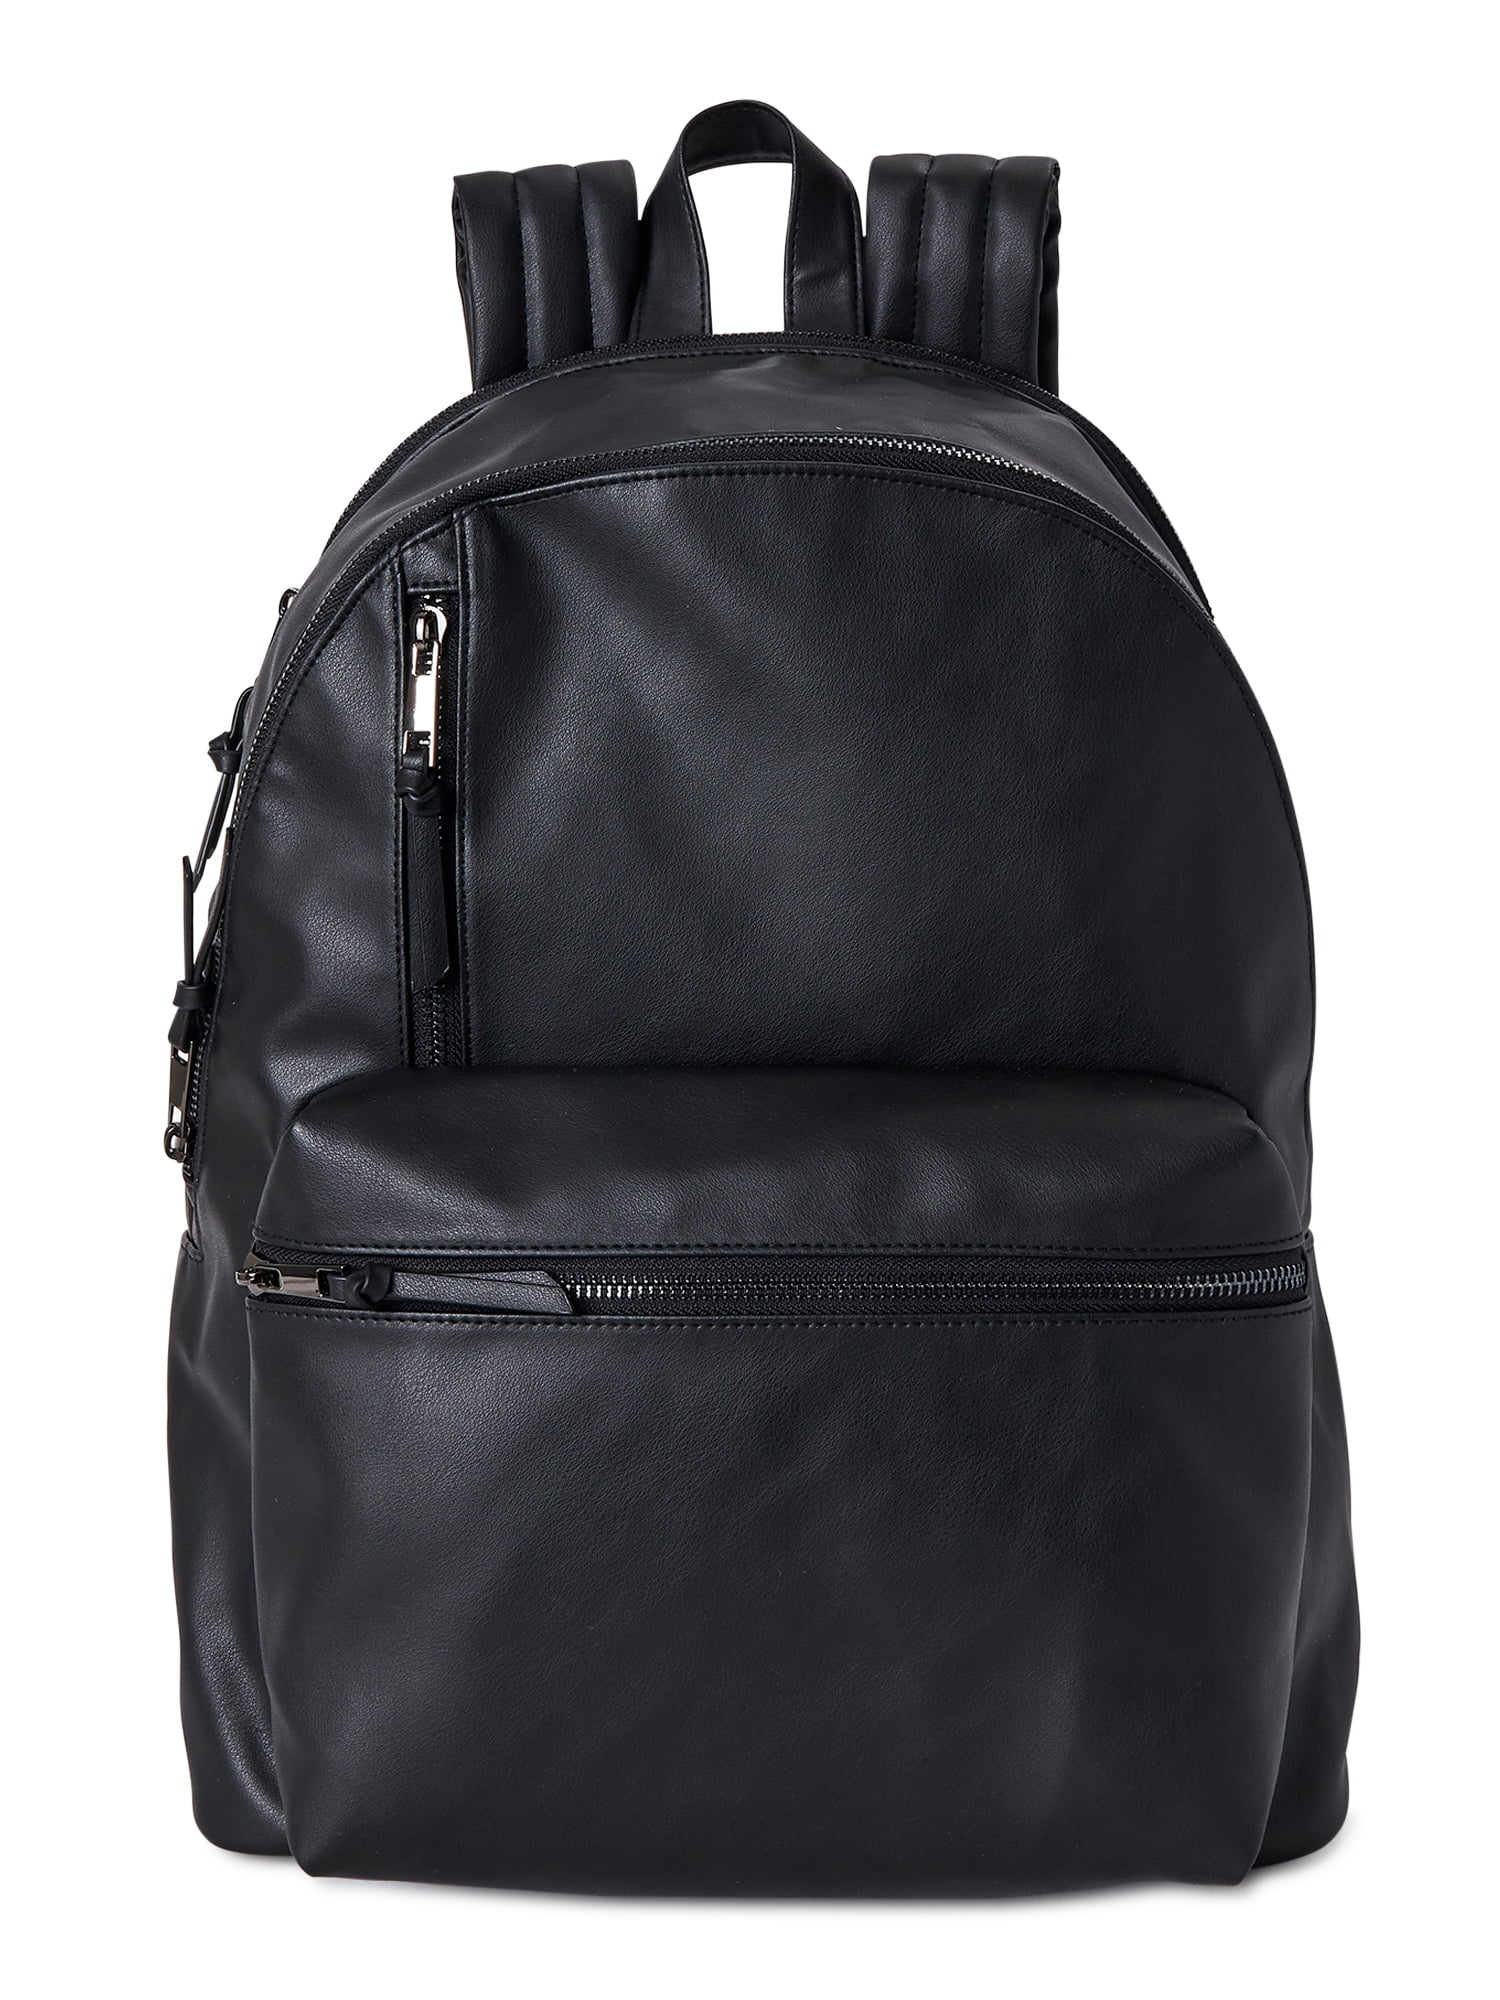 No Boundaries Women's Dome Zip Backpack Black Faux Leather